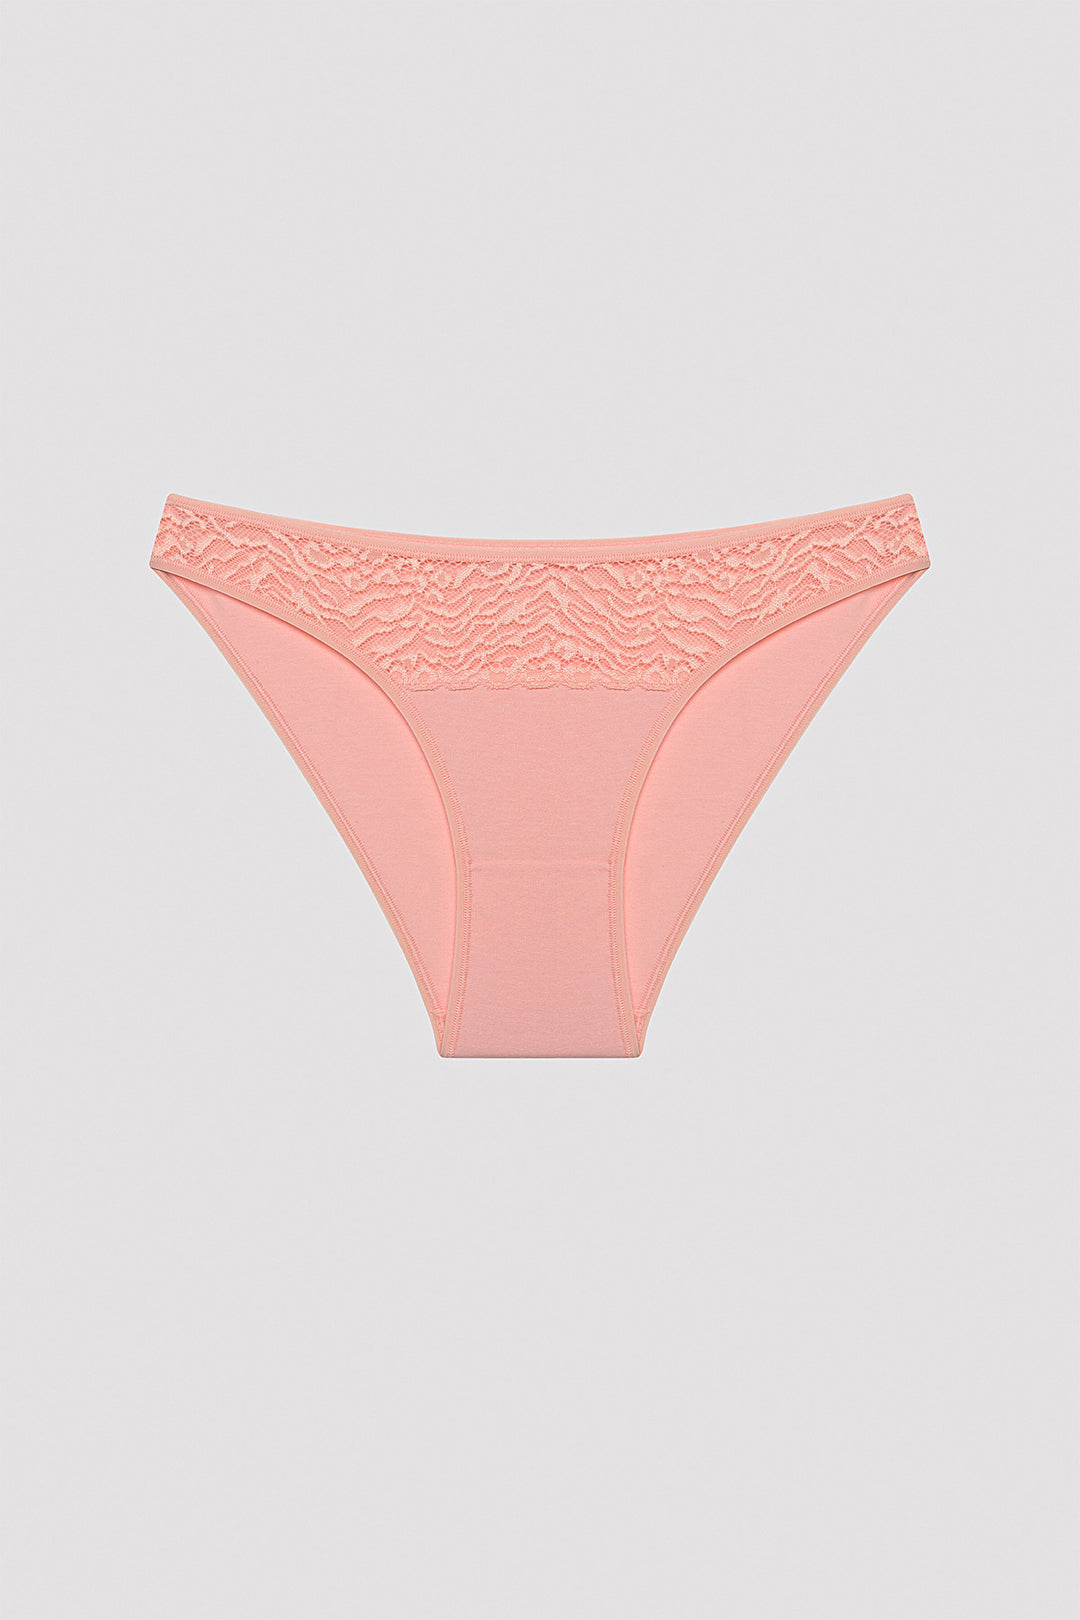 Coral Vibes Lacy Detailed 3in1 Slip